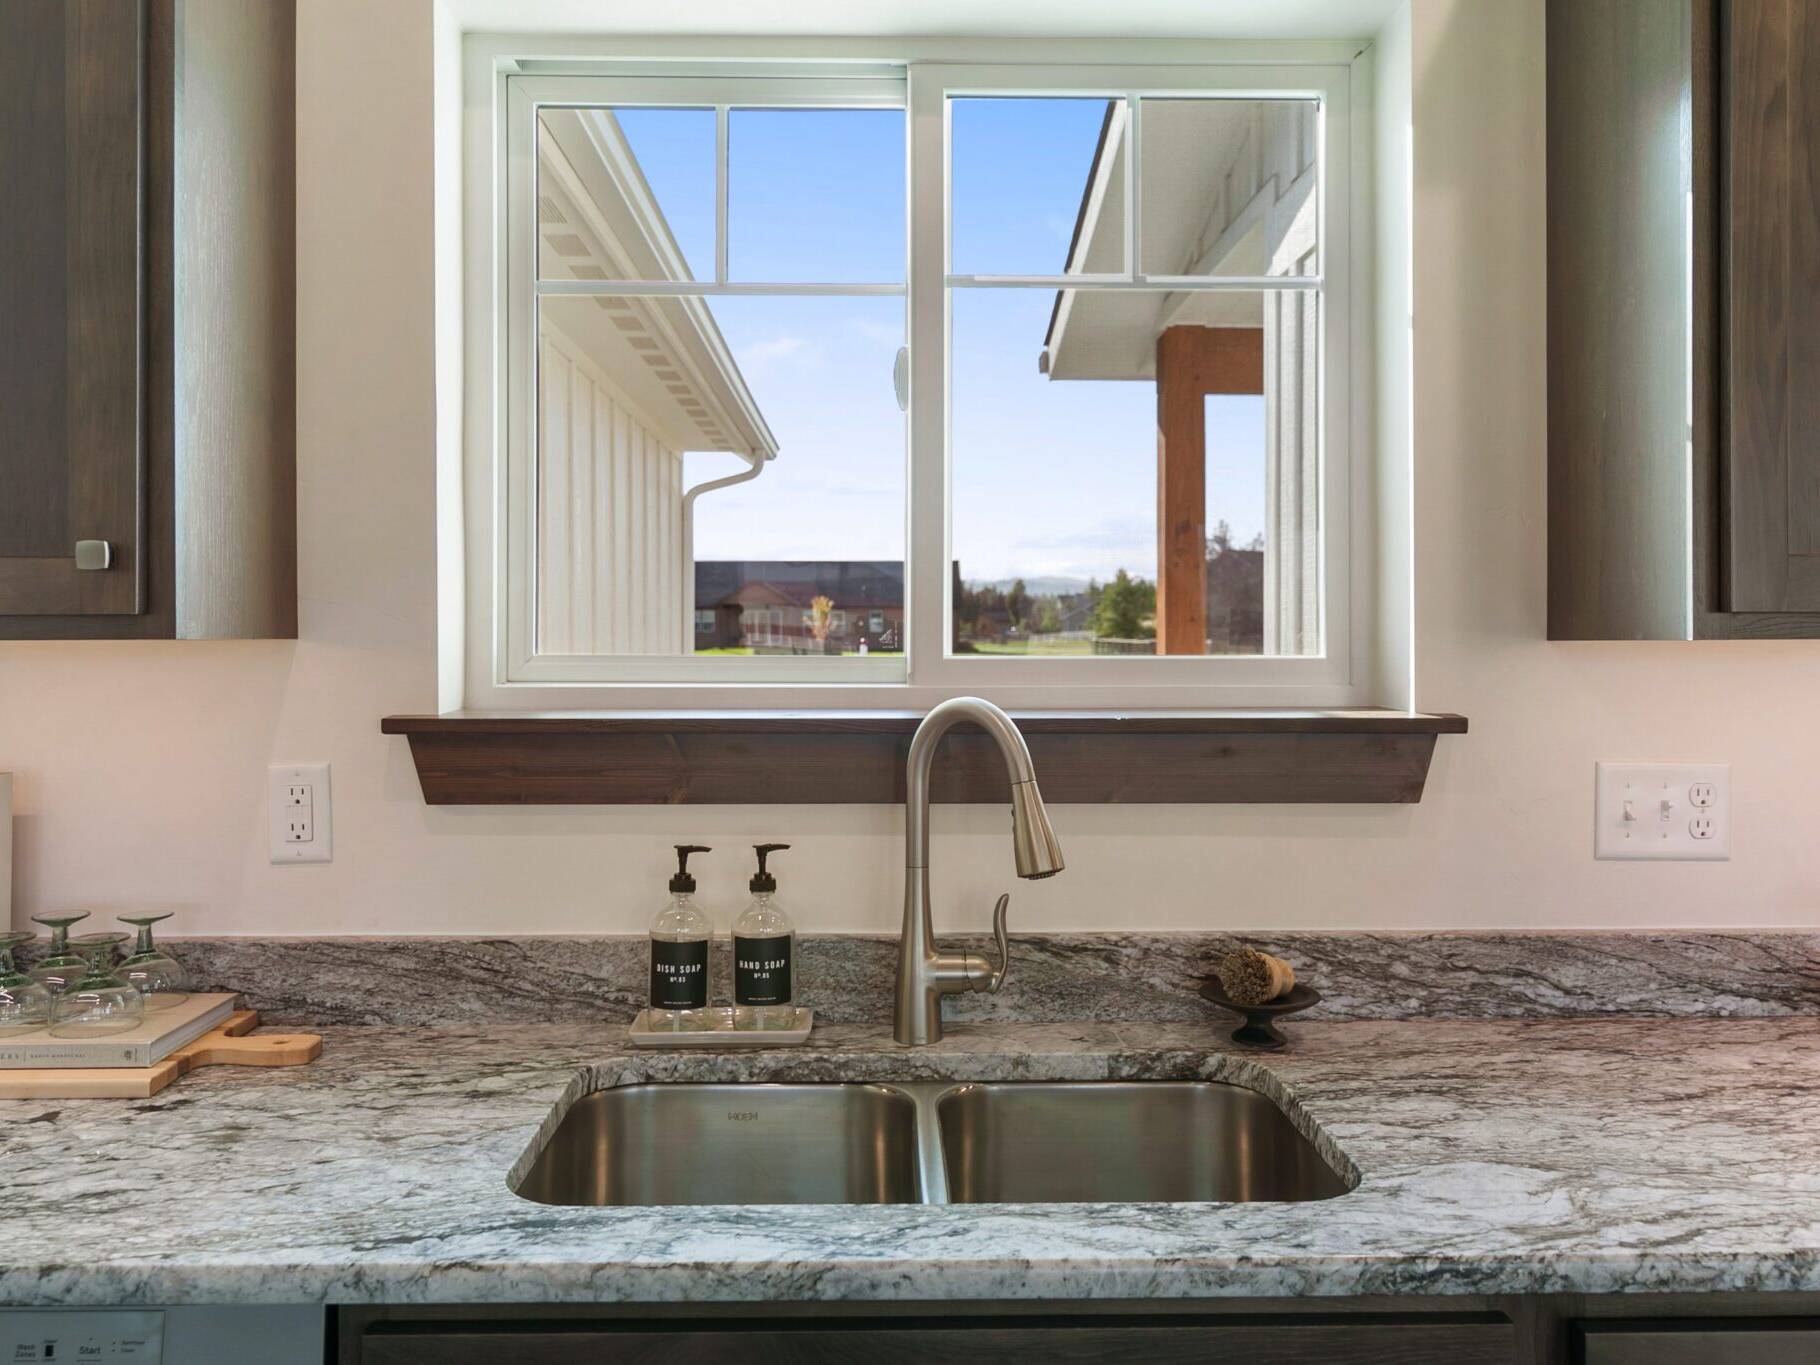 Kitchen sink in The Seeley model home - Built by Big Sky Builder in Hamilton, MT